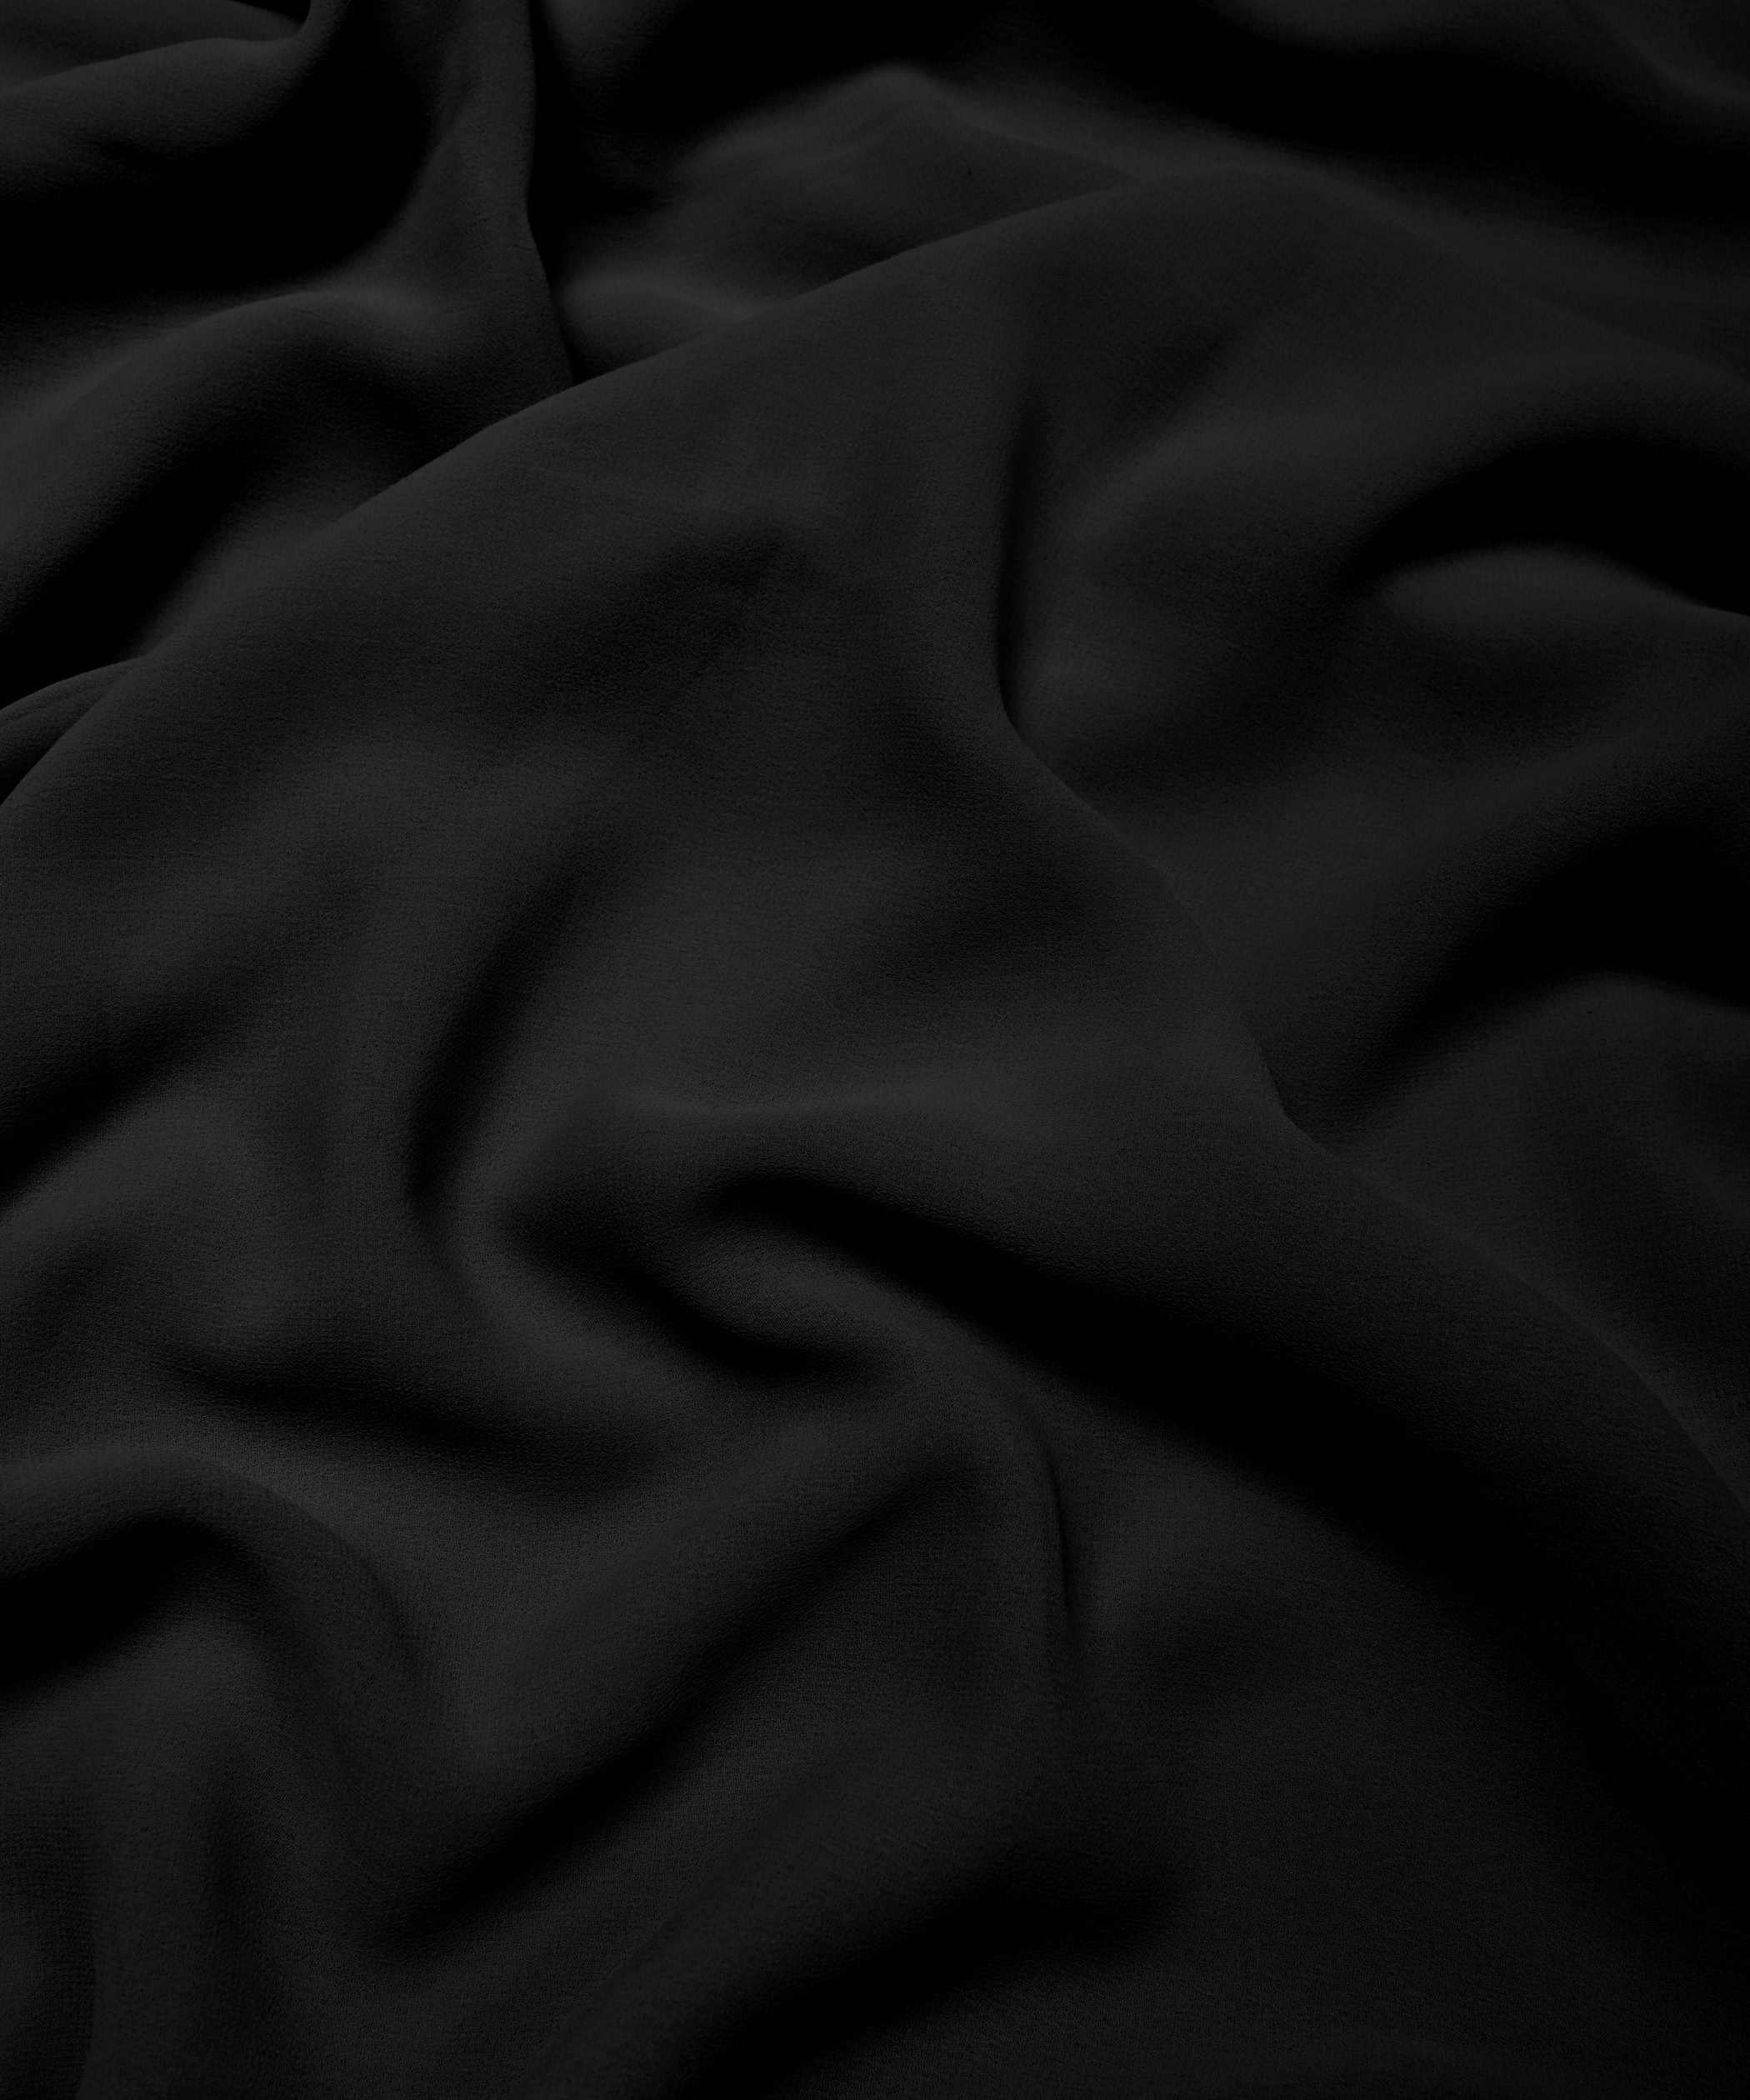 Cationic Black Plain Dyed Georgette (60 Grams) Fabric